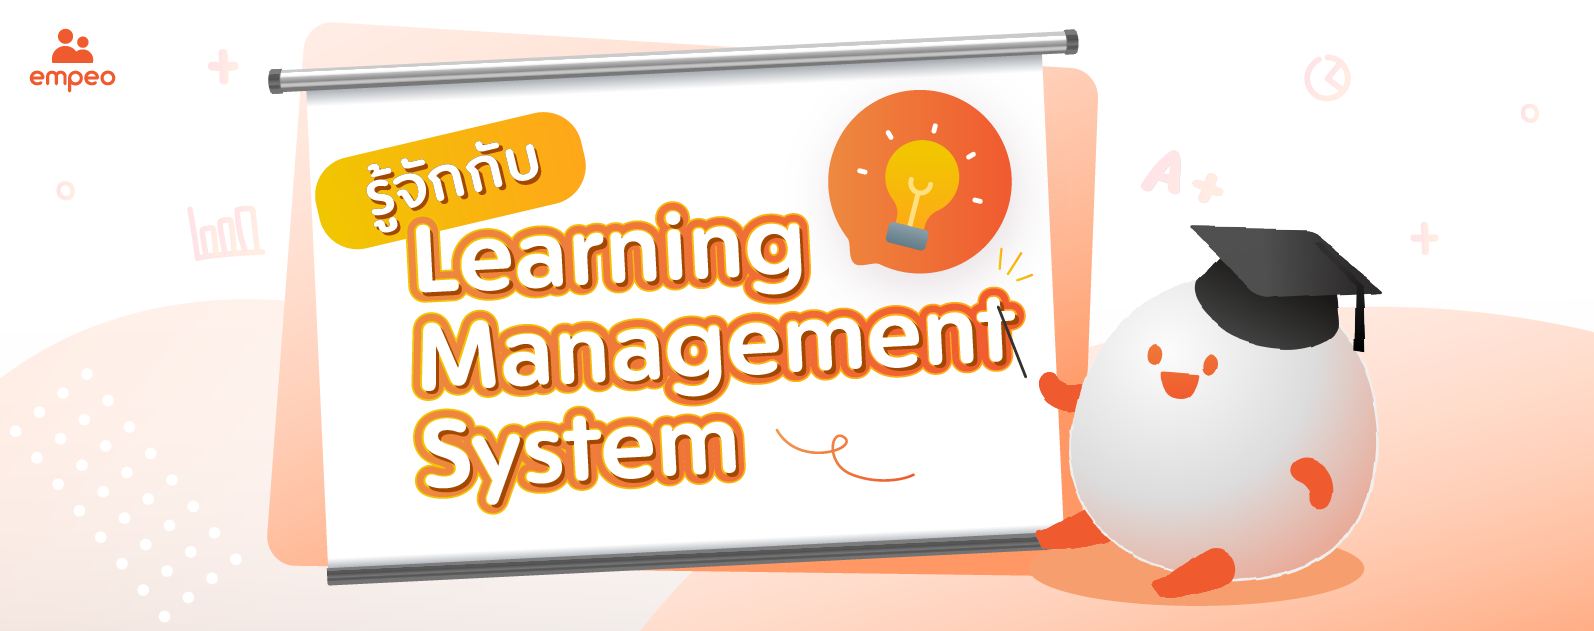 empeo mascot with learning management system